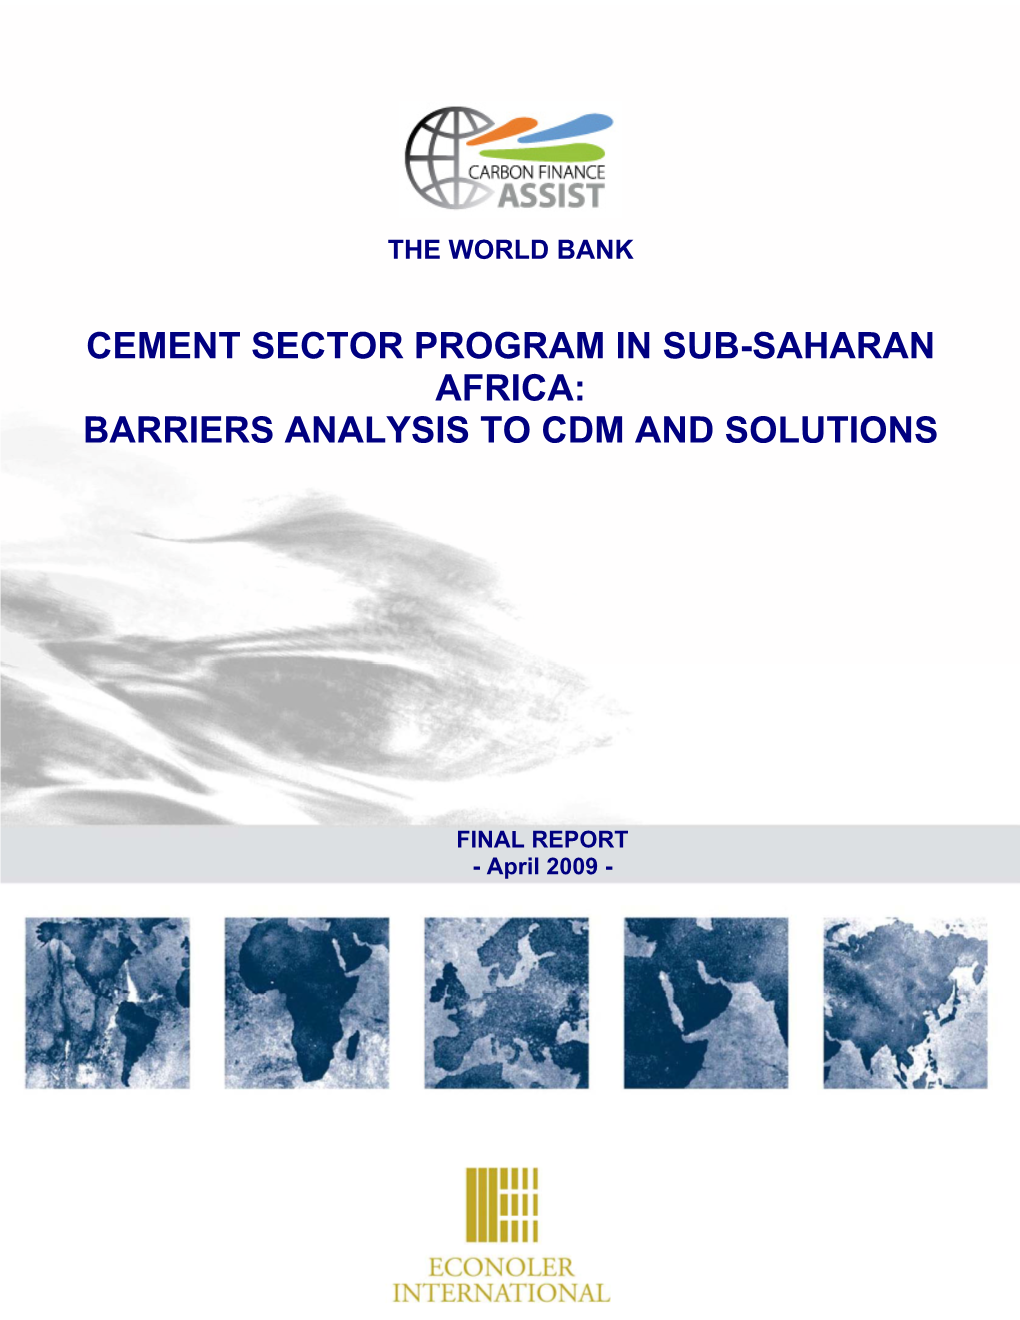 Cement Sector Program in Sub-Saharan Africa: Barriers Analysis to Cdm and Solutions